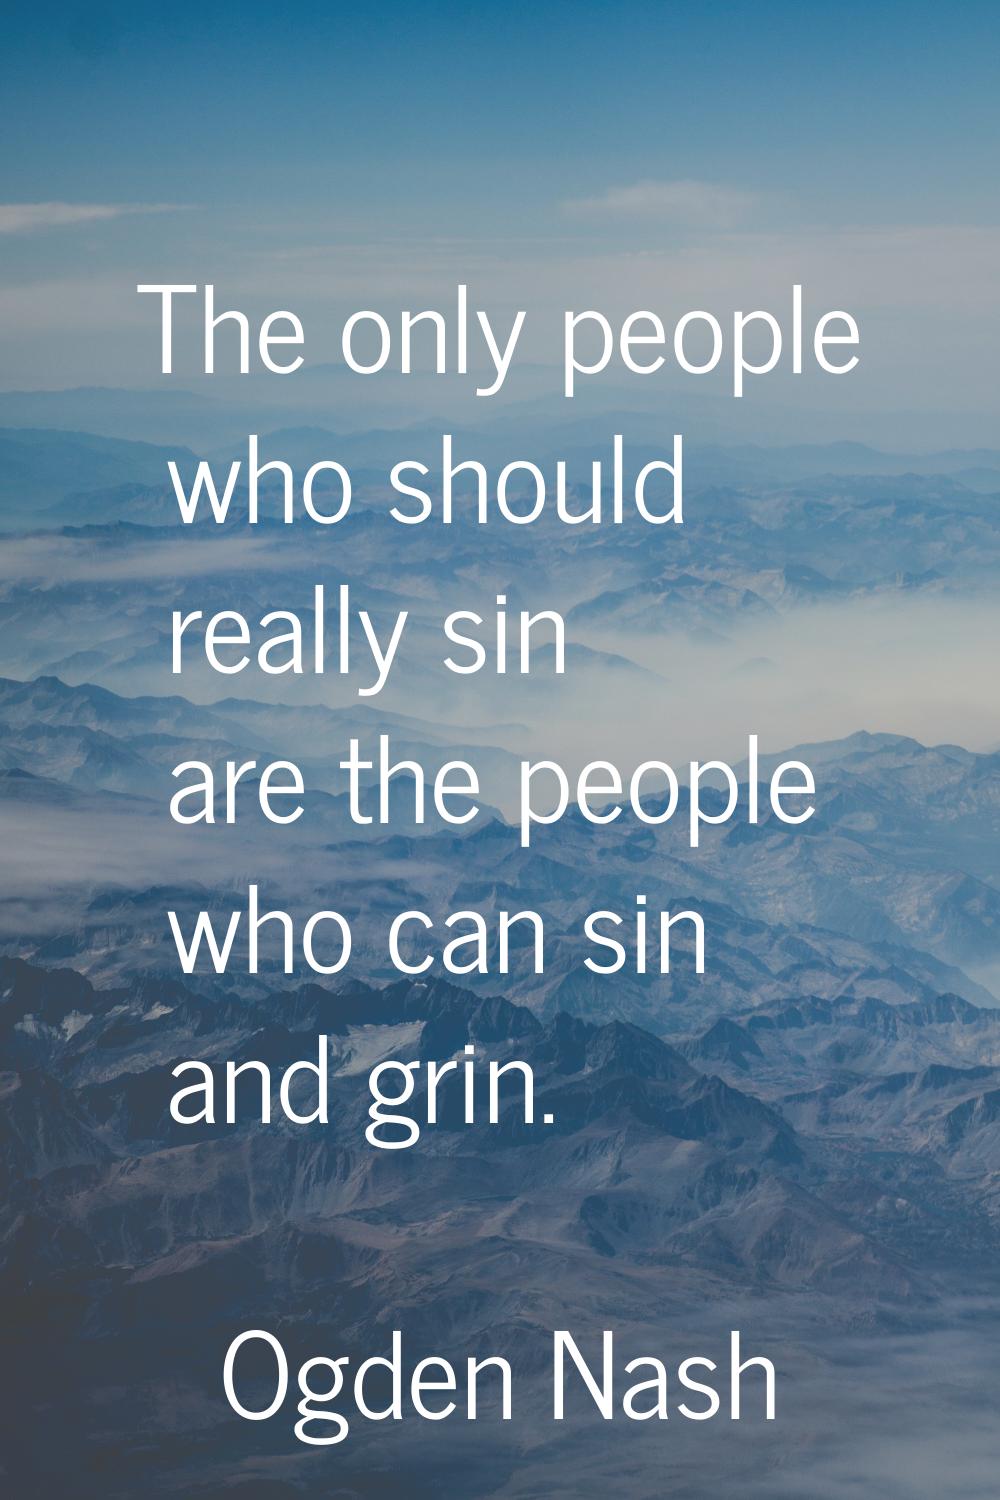 The only people who should really sin are the people who can sin and grin.